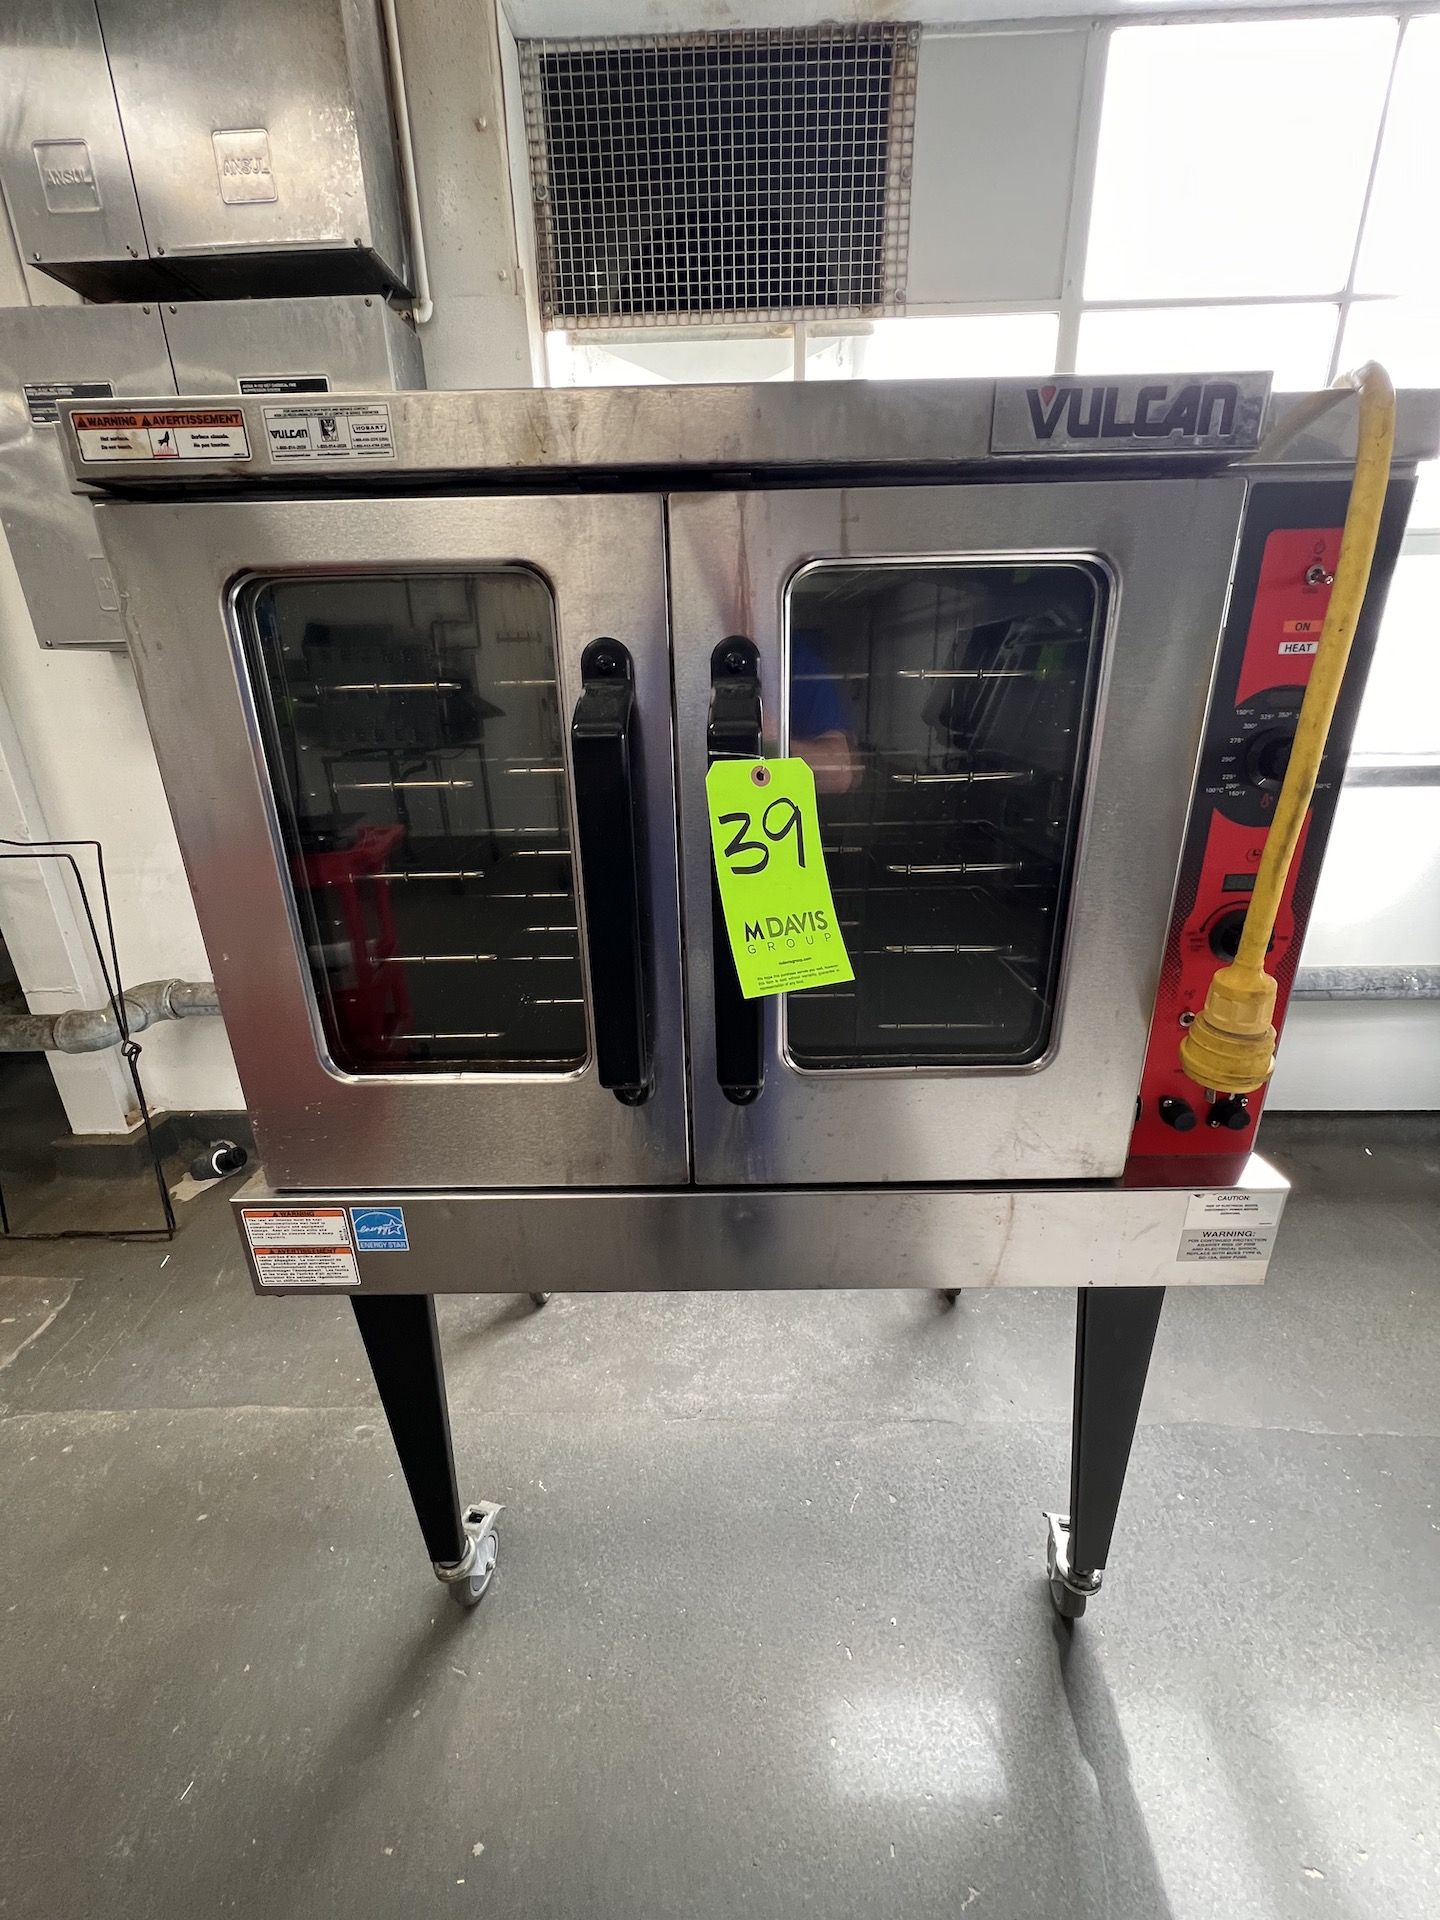 VULCAN S/S OVEN, MODEL VC5ED, S/N481985509, 208 V, 3/1 PH, PORTABLE / MOUNTED ON CASTERS